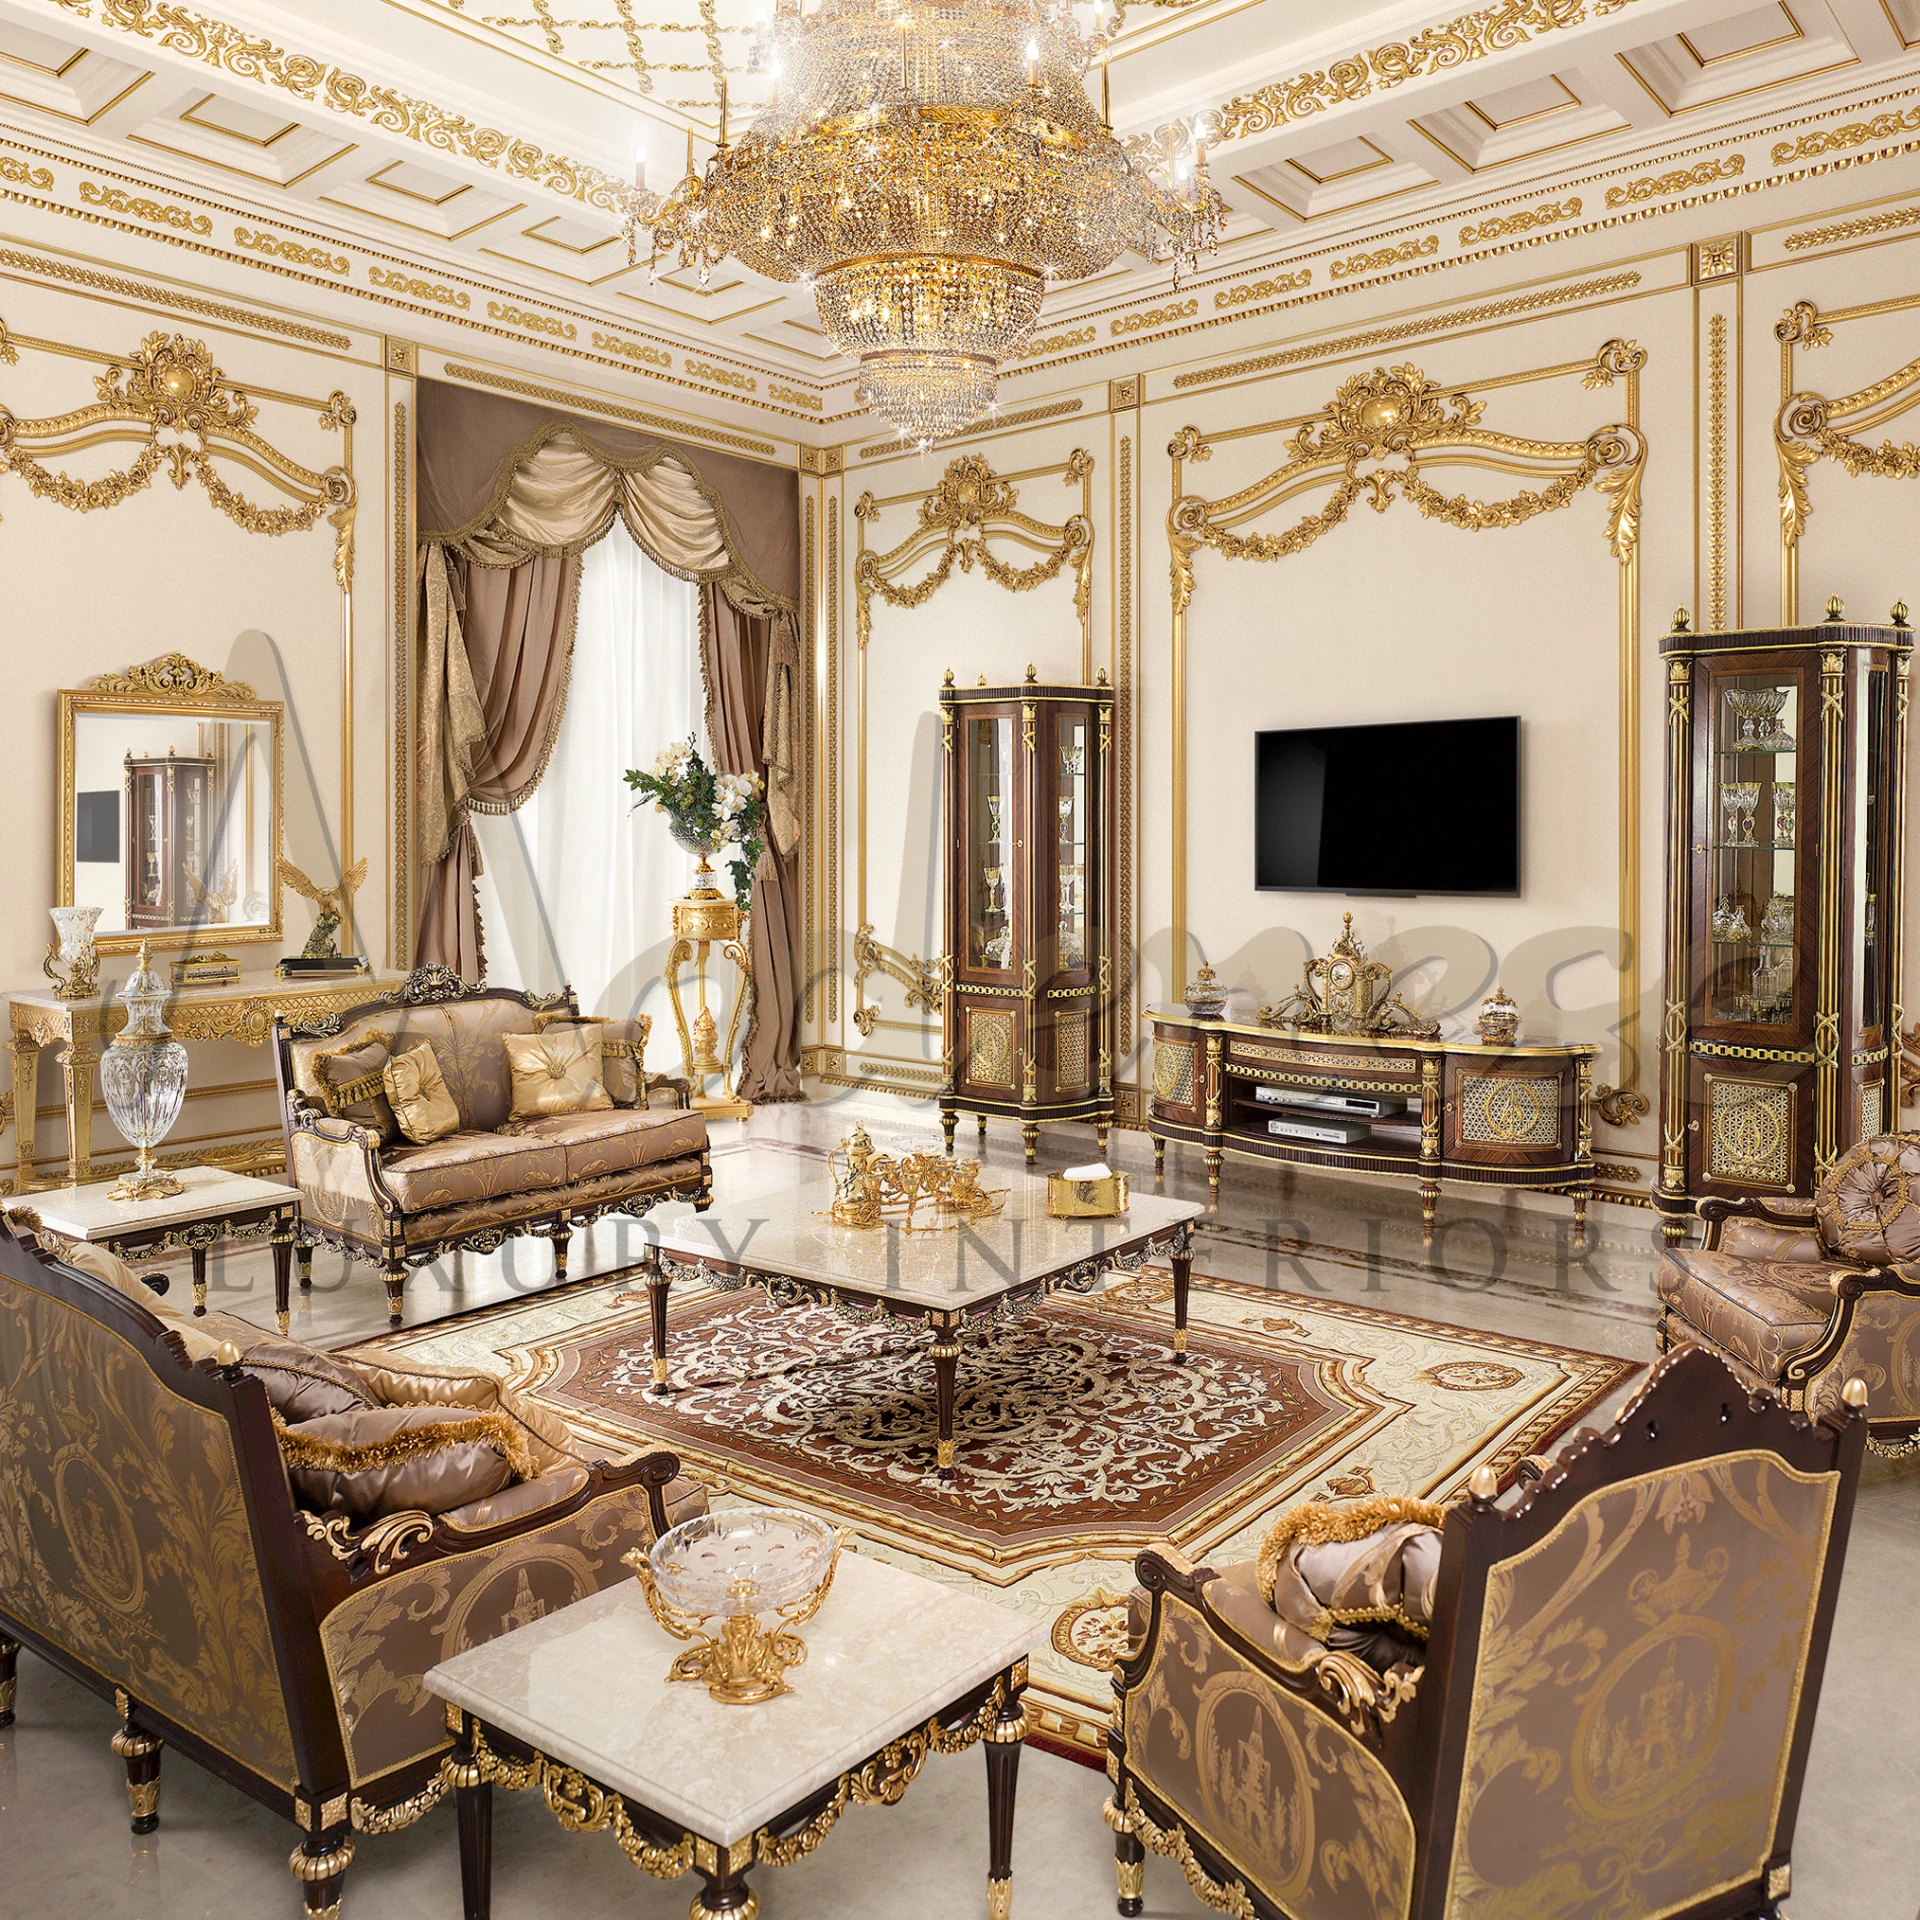 Luxury meets tradition in the Noble Gold Leaf Mirror, showcasing exquisite mirror design and craftsmanship from Italy.